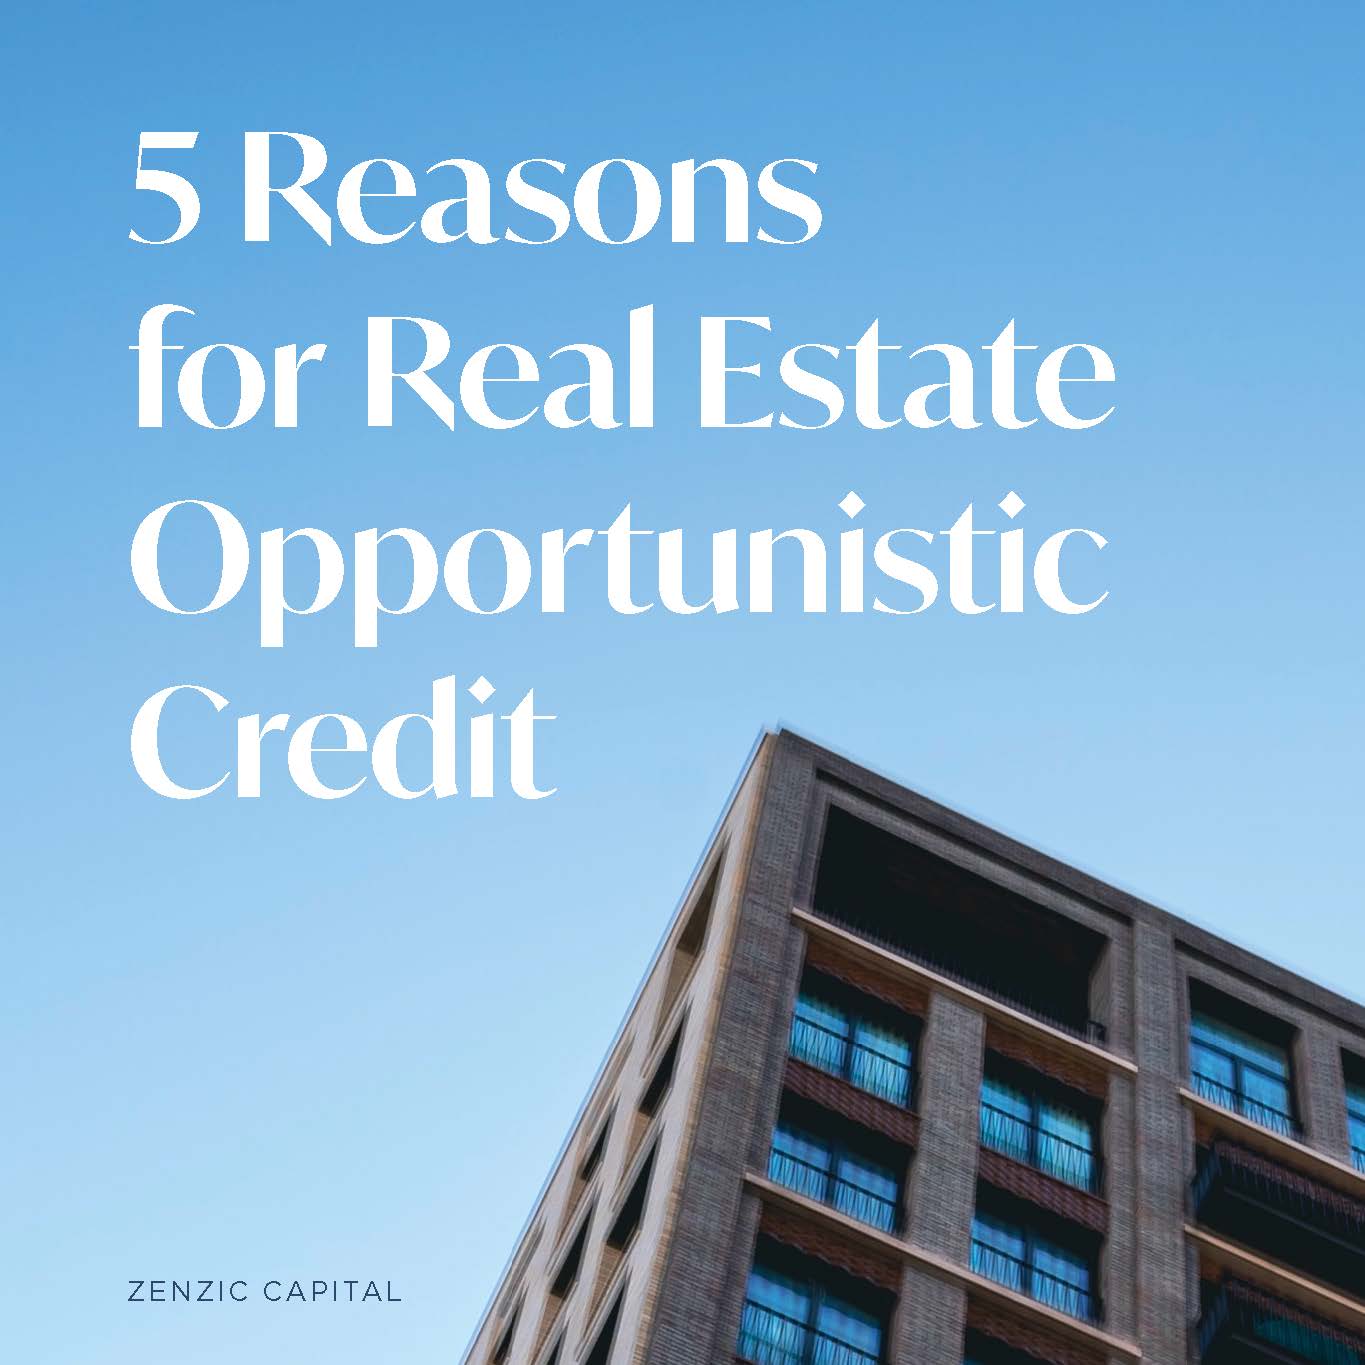 5 Reasons to invest in Real Estate Opportunistic Credit